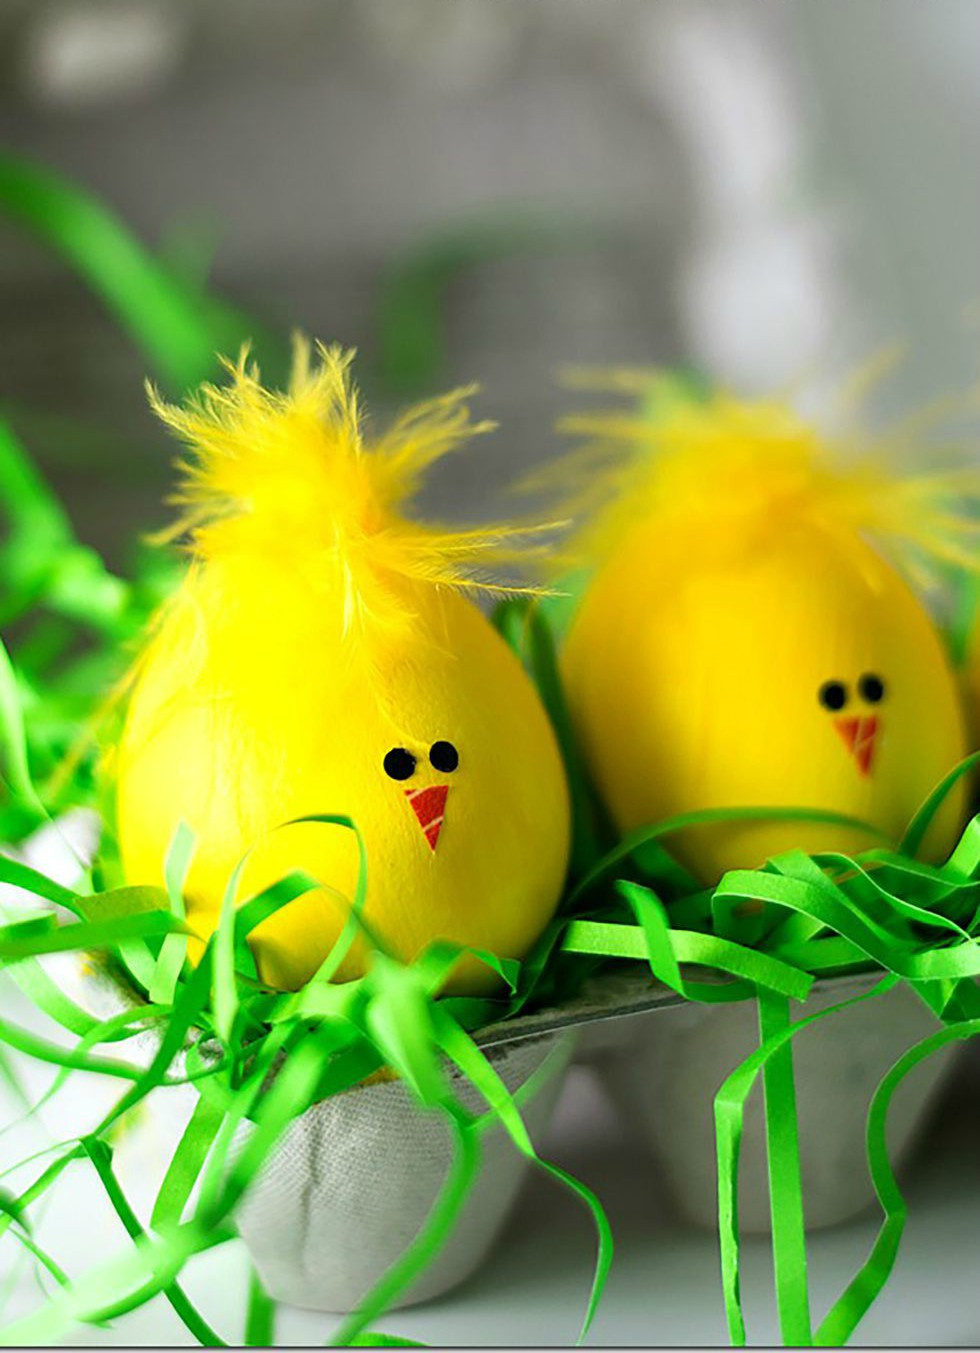 Cute Ideas For Easter
 Cute Easter Egg Ideas That Kids Will Go Crazy For